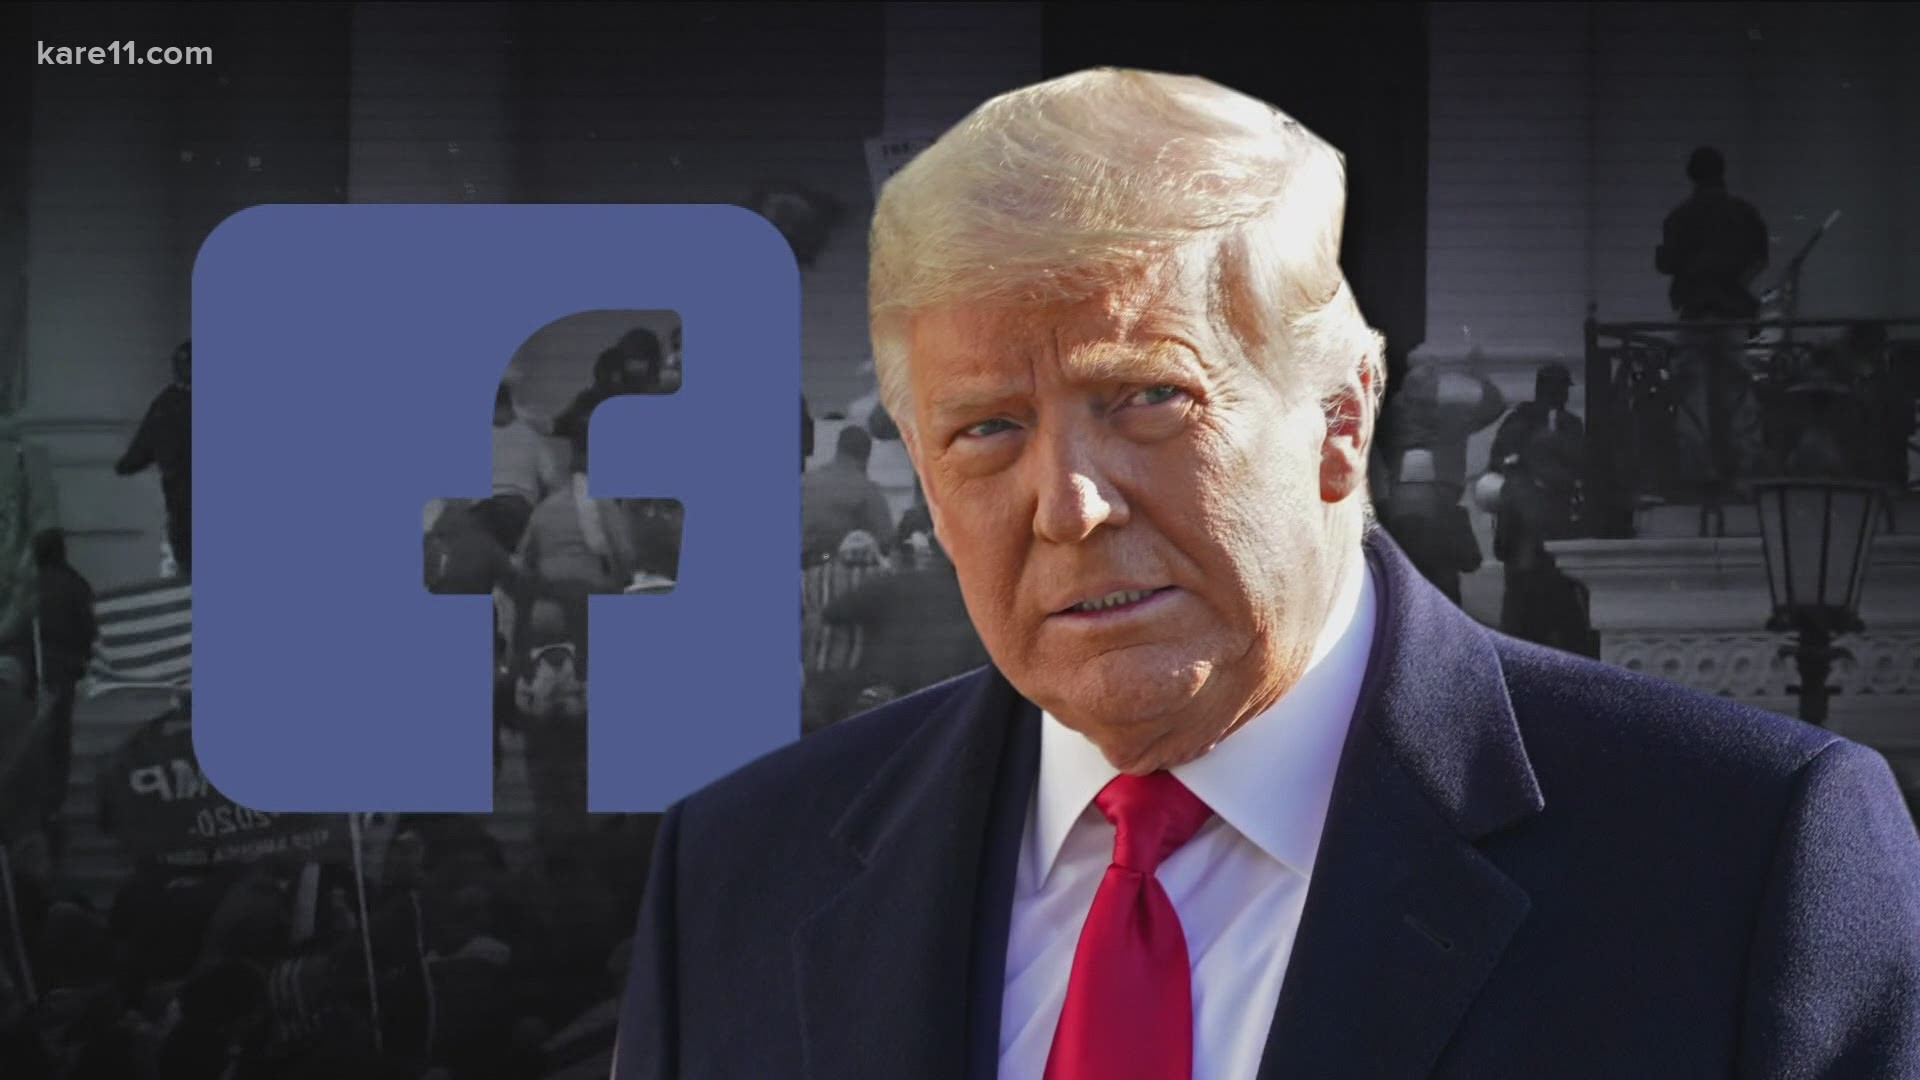 On Wednesday, the Oversight Board will unveil whether former President Trump's Facebook ban remains in place. The decision will have worldwide implications.